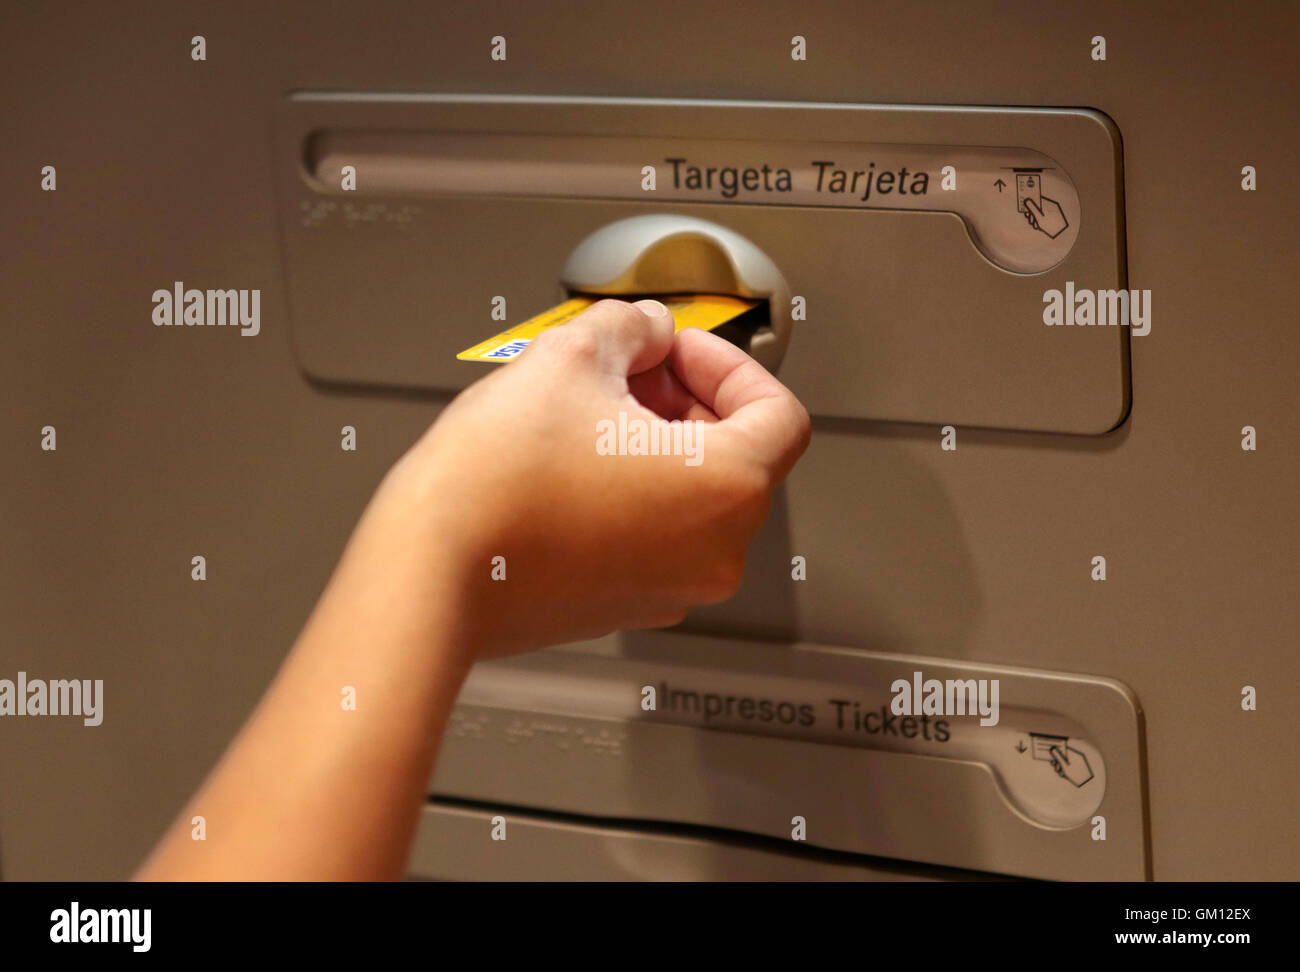 Using a credit card on a contactless system on a atm in Spain. Stock Photo